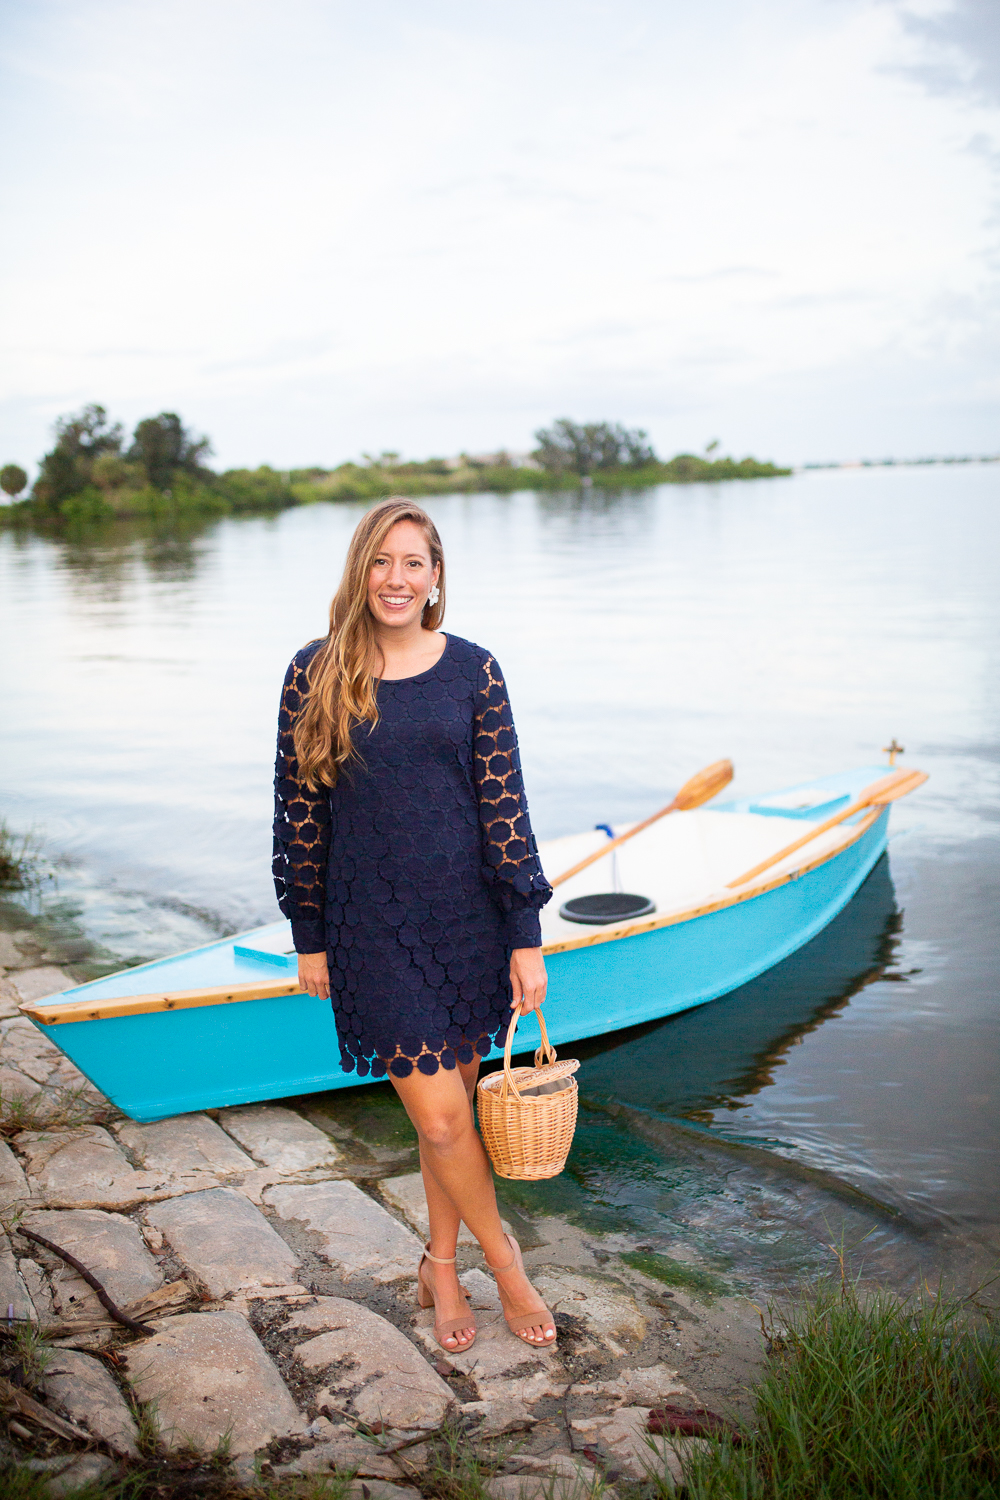 What to Wear to a Fall Wedding / Preppy Dress Ideas for a Fall Wedding / Navy Wedding Guest Dress / Sail to Sable Dress / Blue Row Boat on Water - Sunshine Style Blog